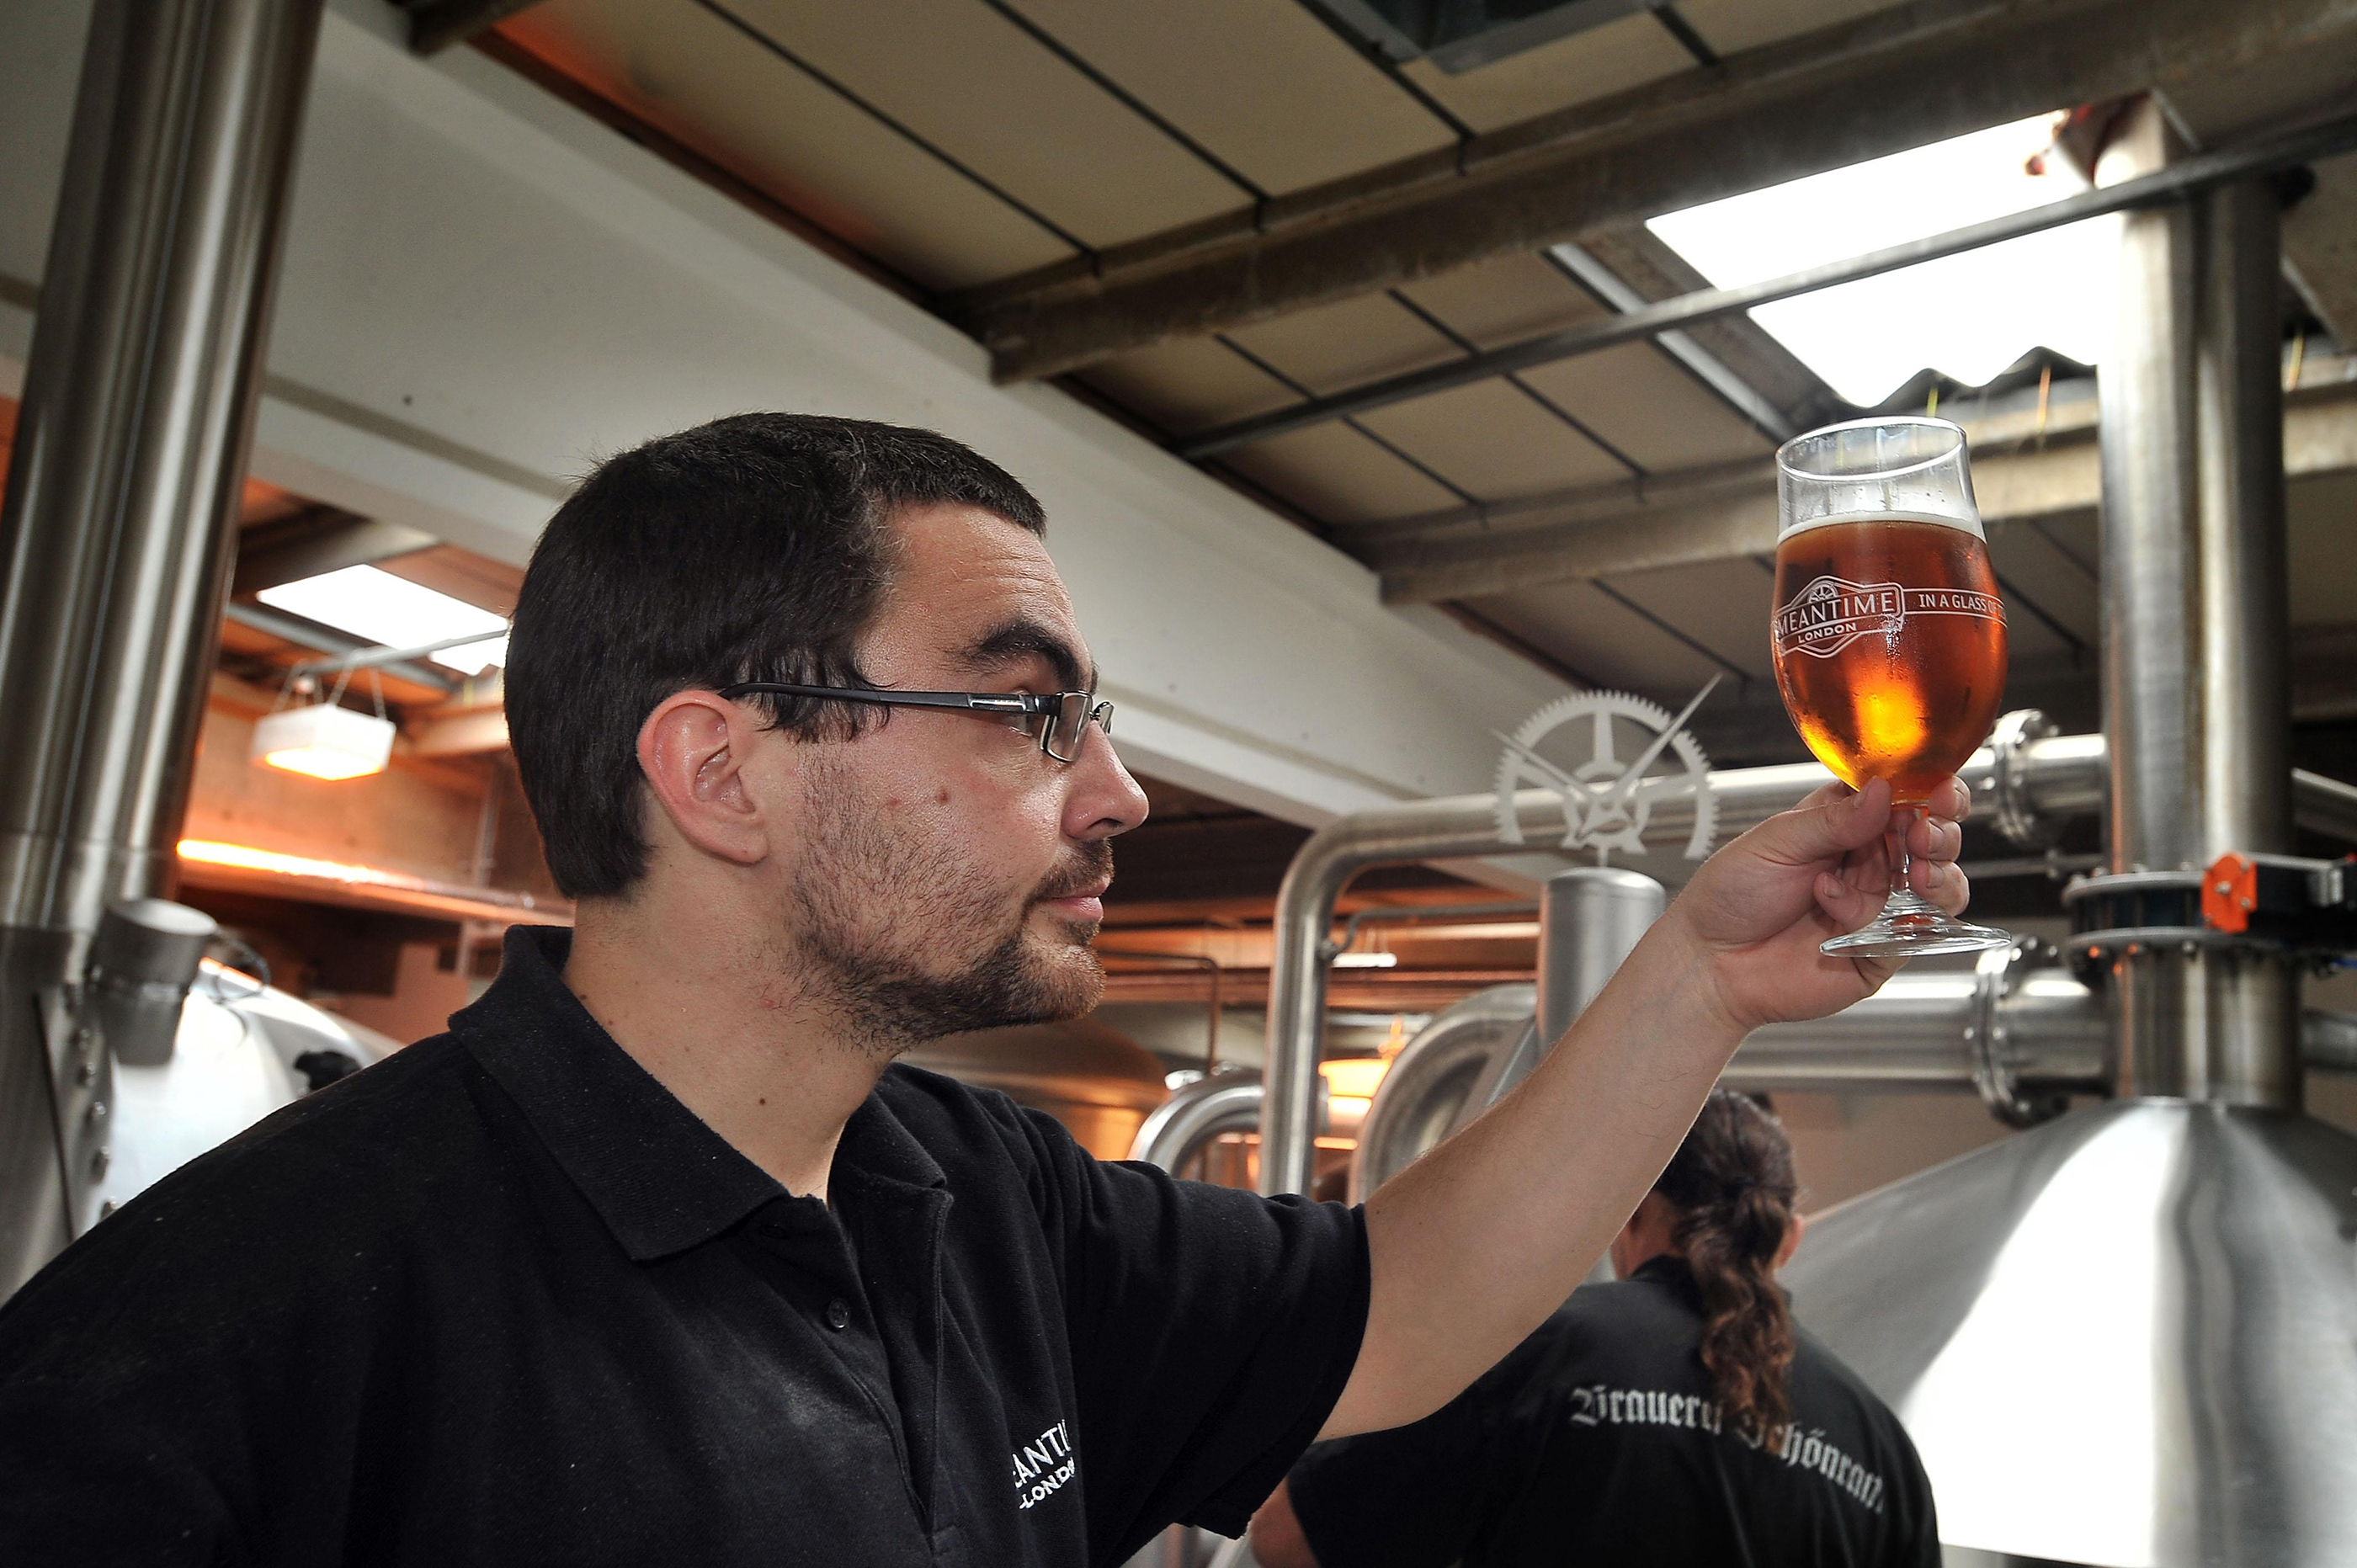 Dream Job Alert: This Brewery Will Pay You to Drink Beer